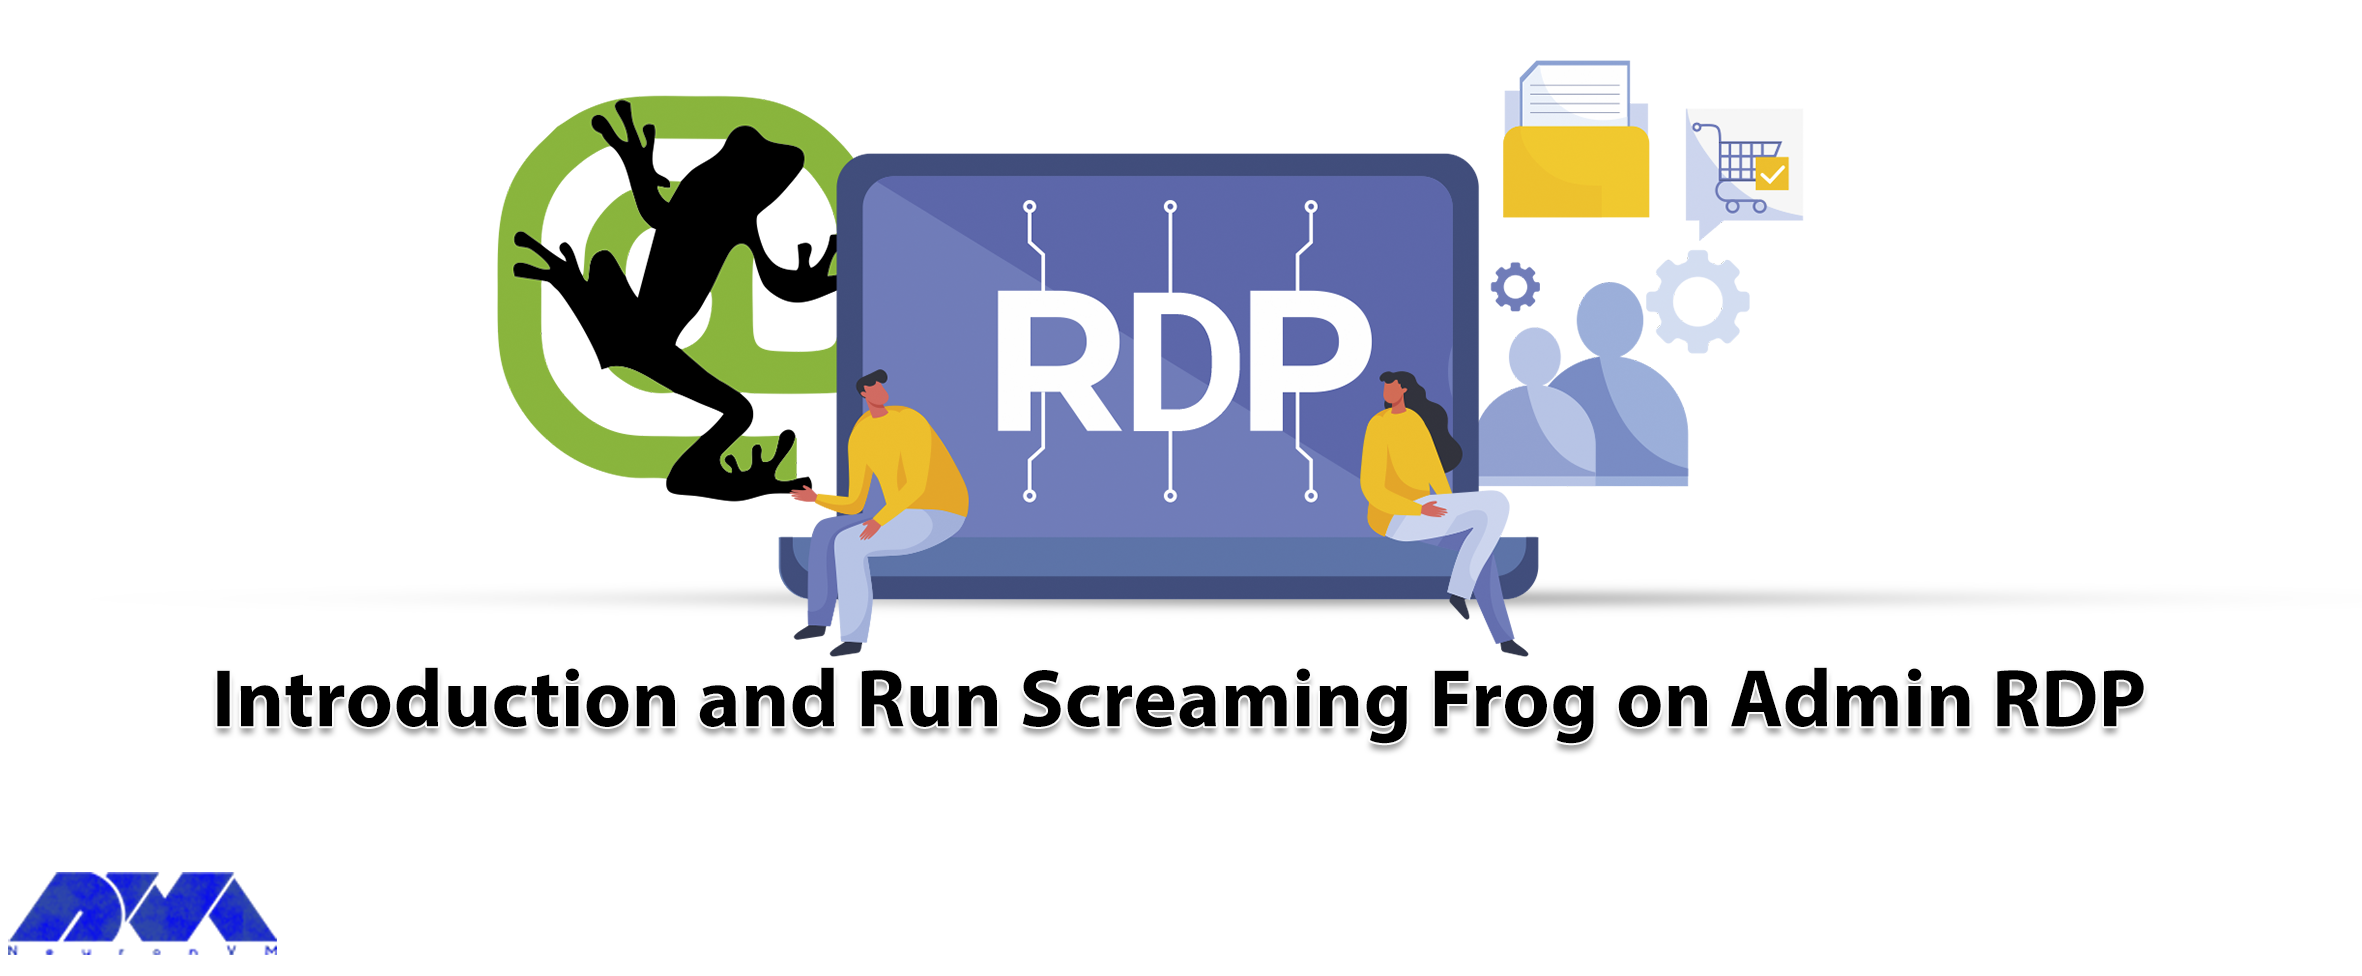 Introduction and Run Screaming Frog on Admin RDP - NeuronVM